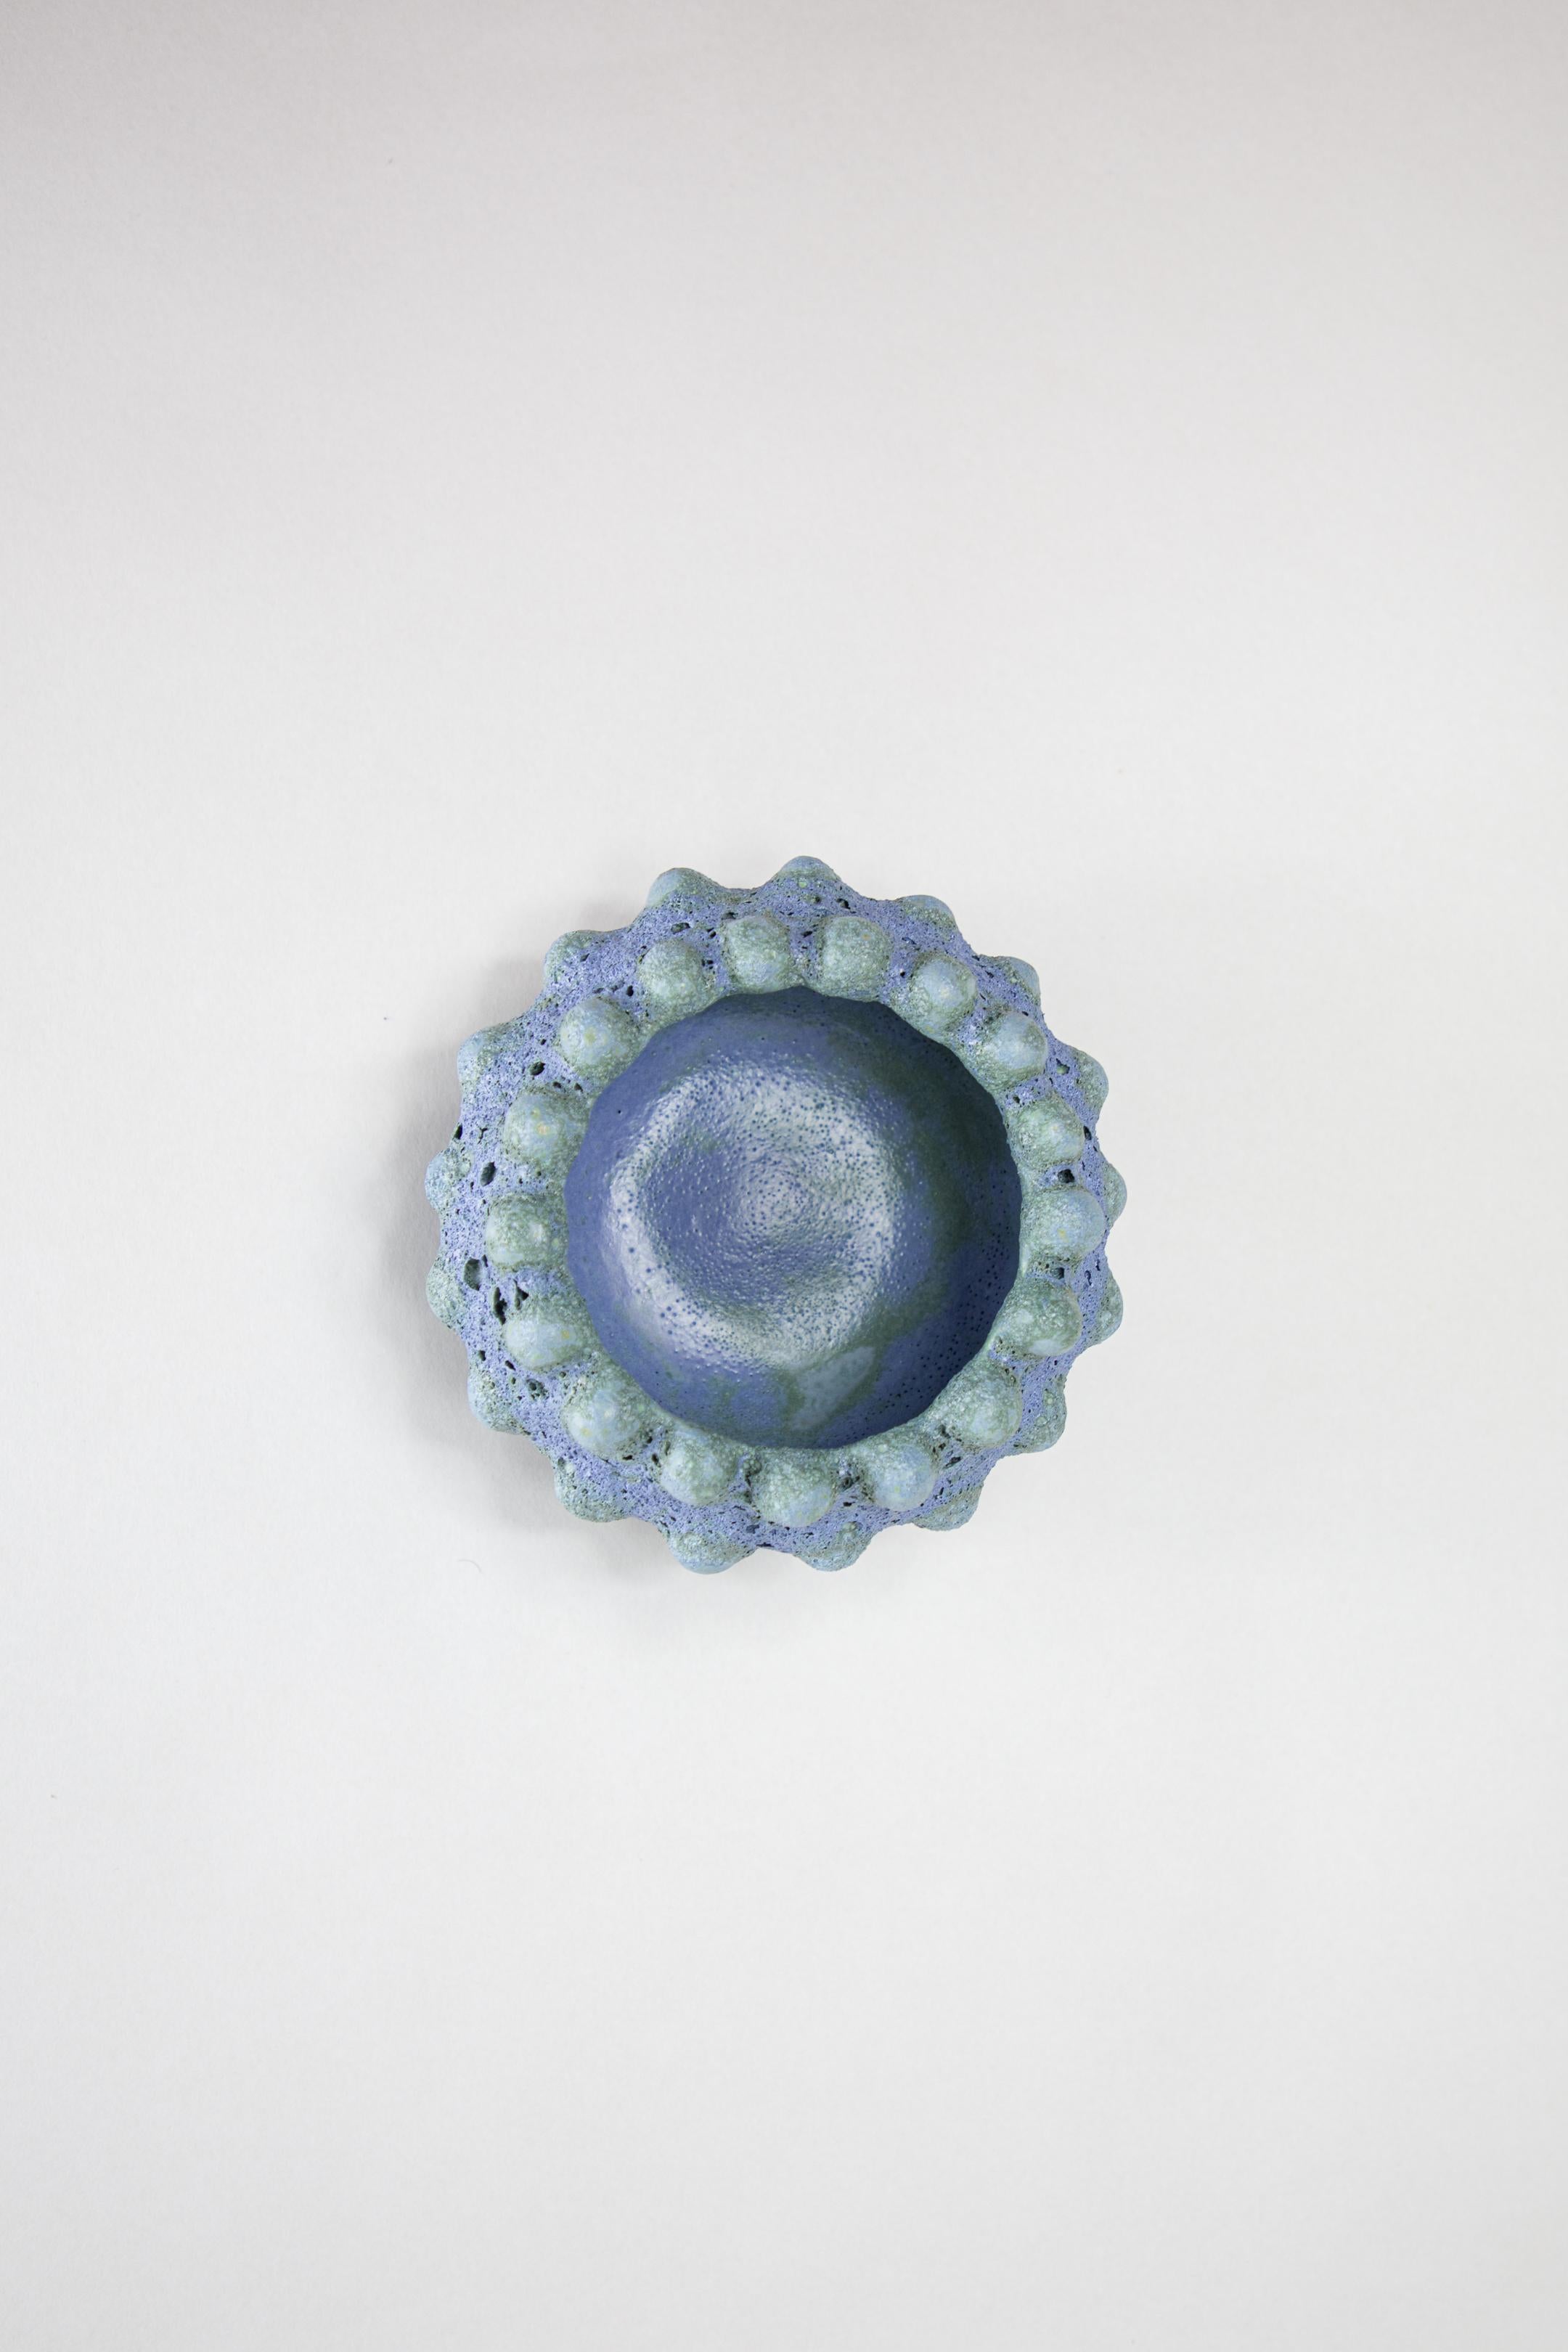 Object 1 Atlantis Collection by Angeliki Stamatakou
One of a kind, 2022
Dimensions: H 7 x W 12 cm.
Materials: Stoneware, handmade glaze.
Colors: blue, pink, ivory.

Angeliki Stamatakou is a ceramics artist based in Athens, Greece. She studied